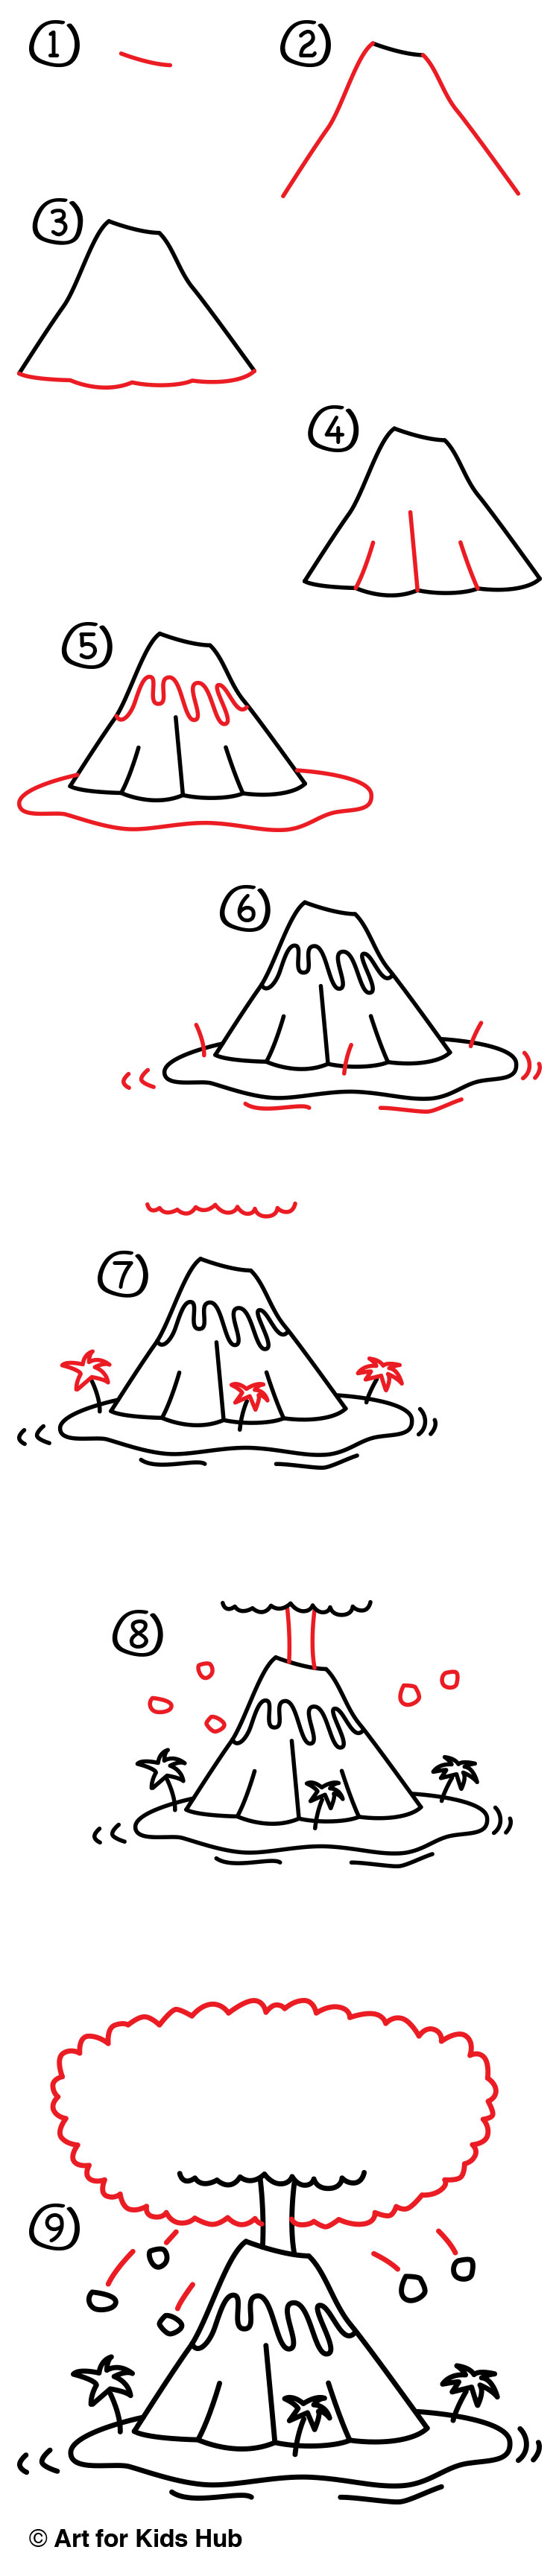 How To Draw A Volcano